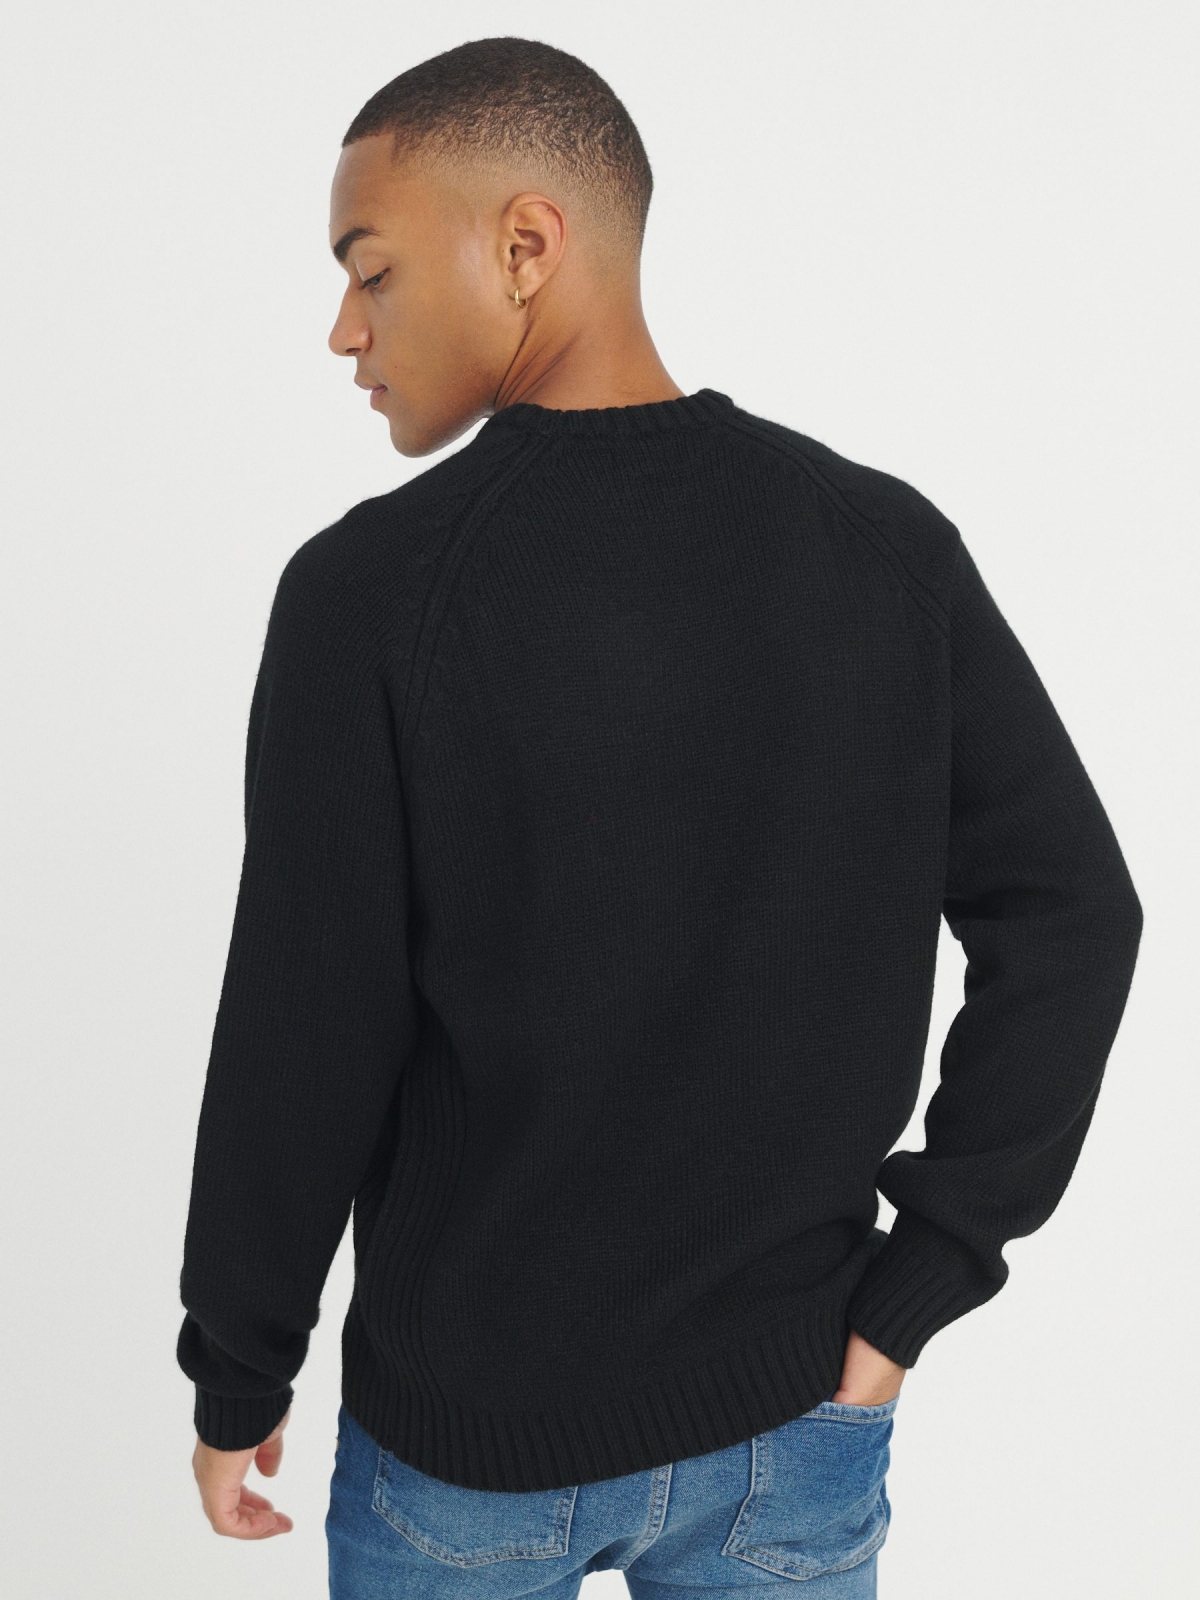 Basic knitted sweater black middle back view